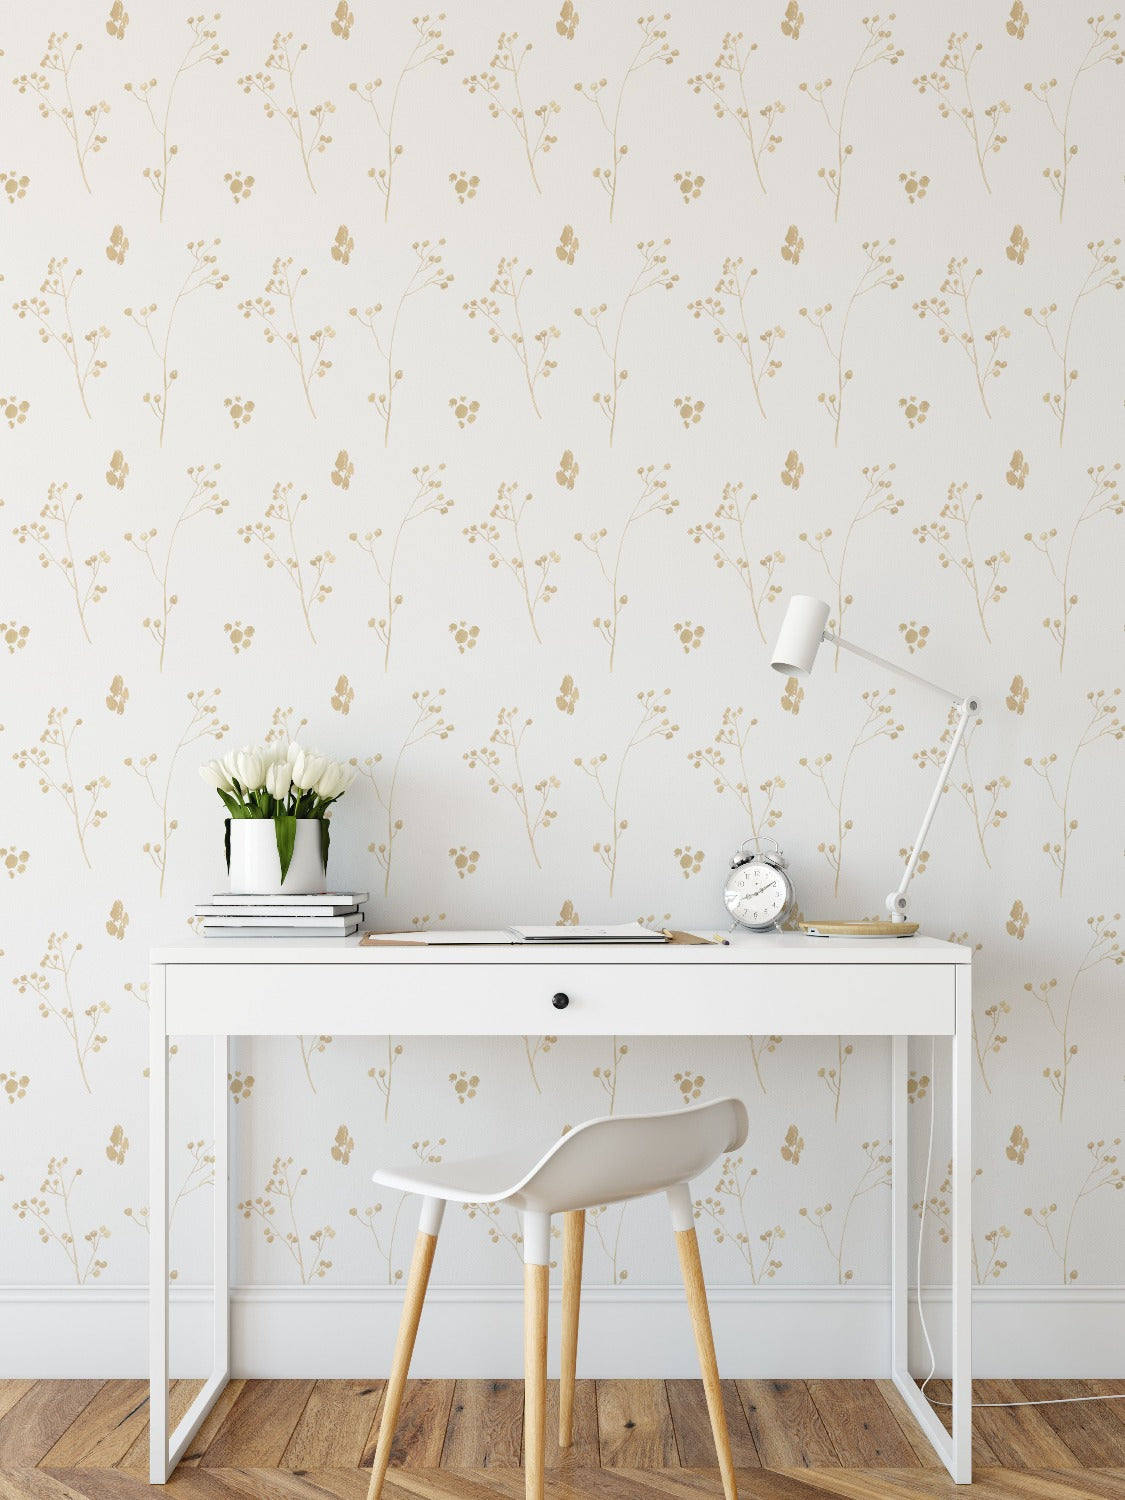 A sophisticated home office setup showcasing the Gold Collection Wallpaper III, with its understated golden floral pattern providing a luxurious backdrop to a clean, white desk and chair, accented by a bouquet of white tulips and a minimalist desk lamp.